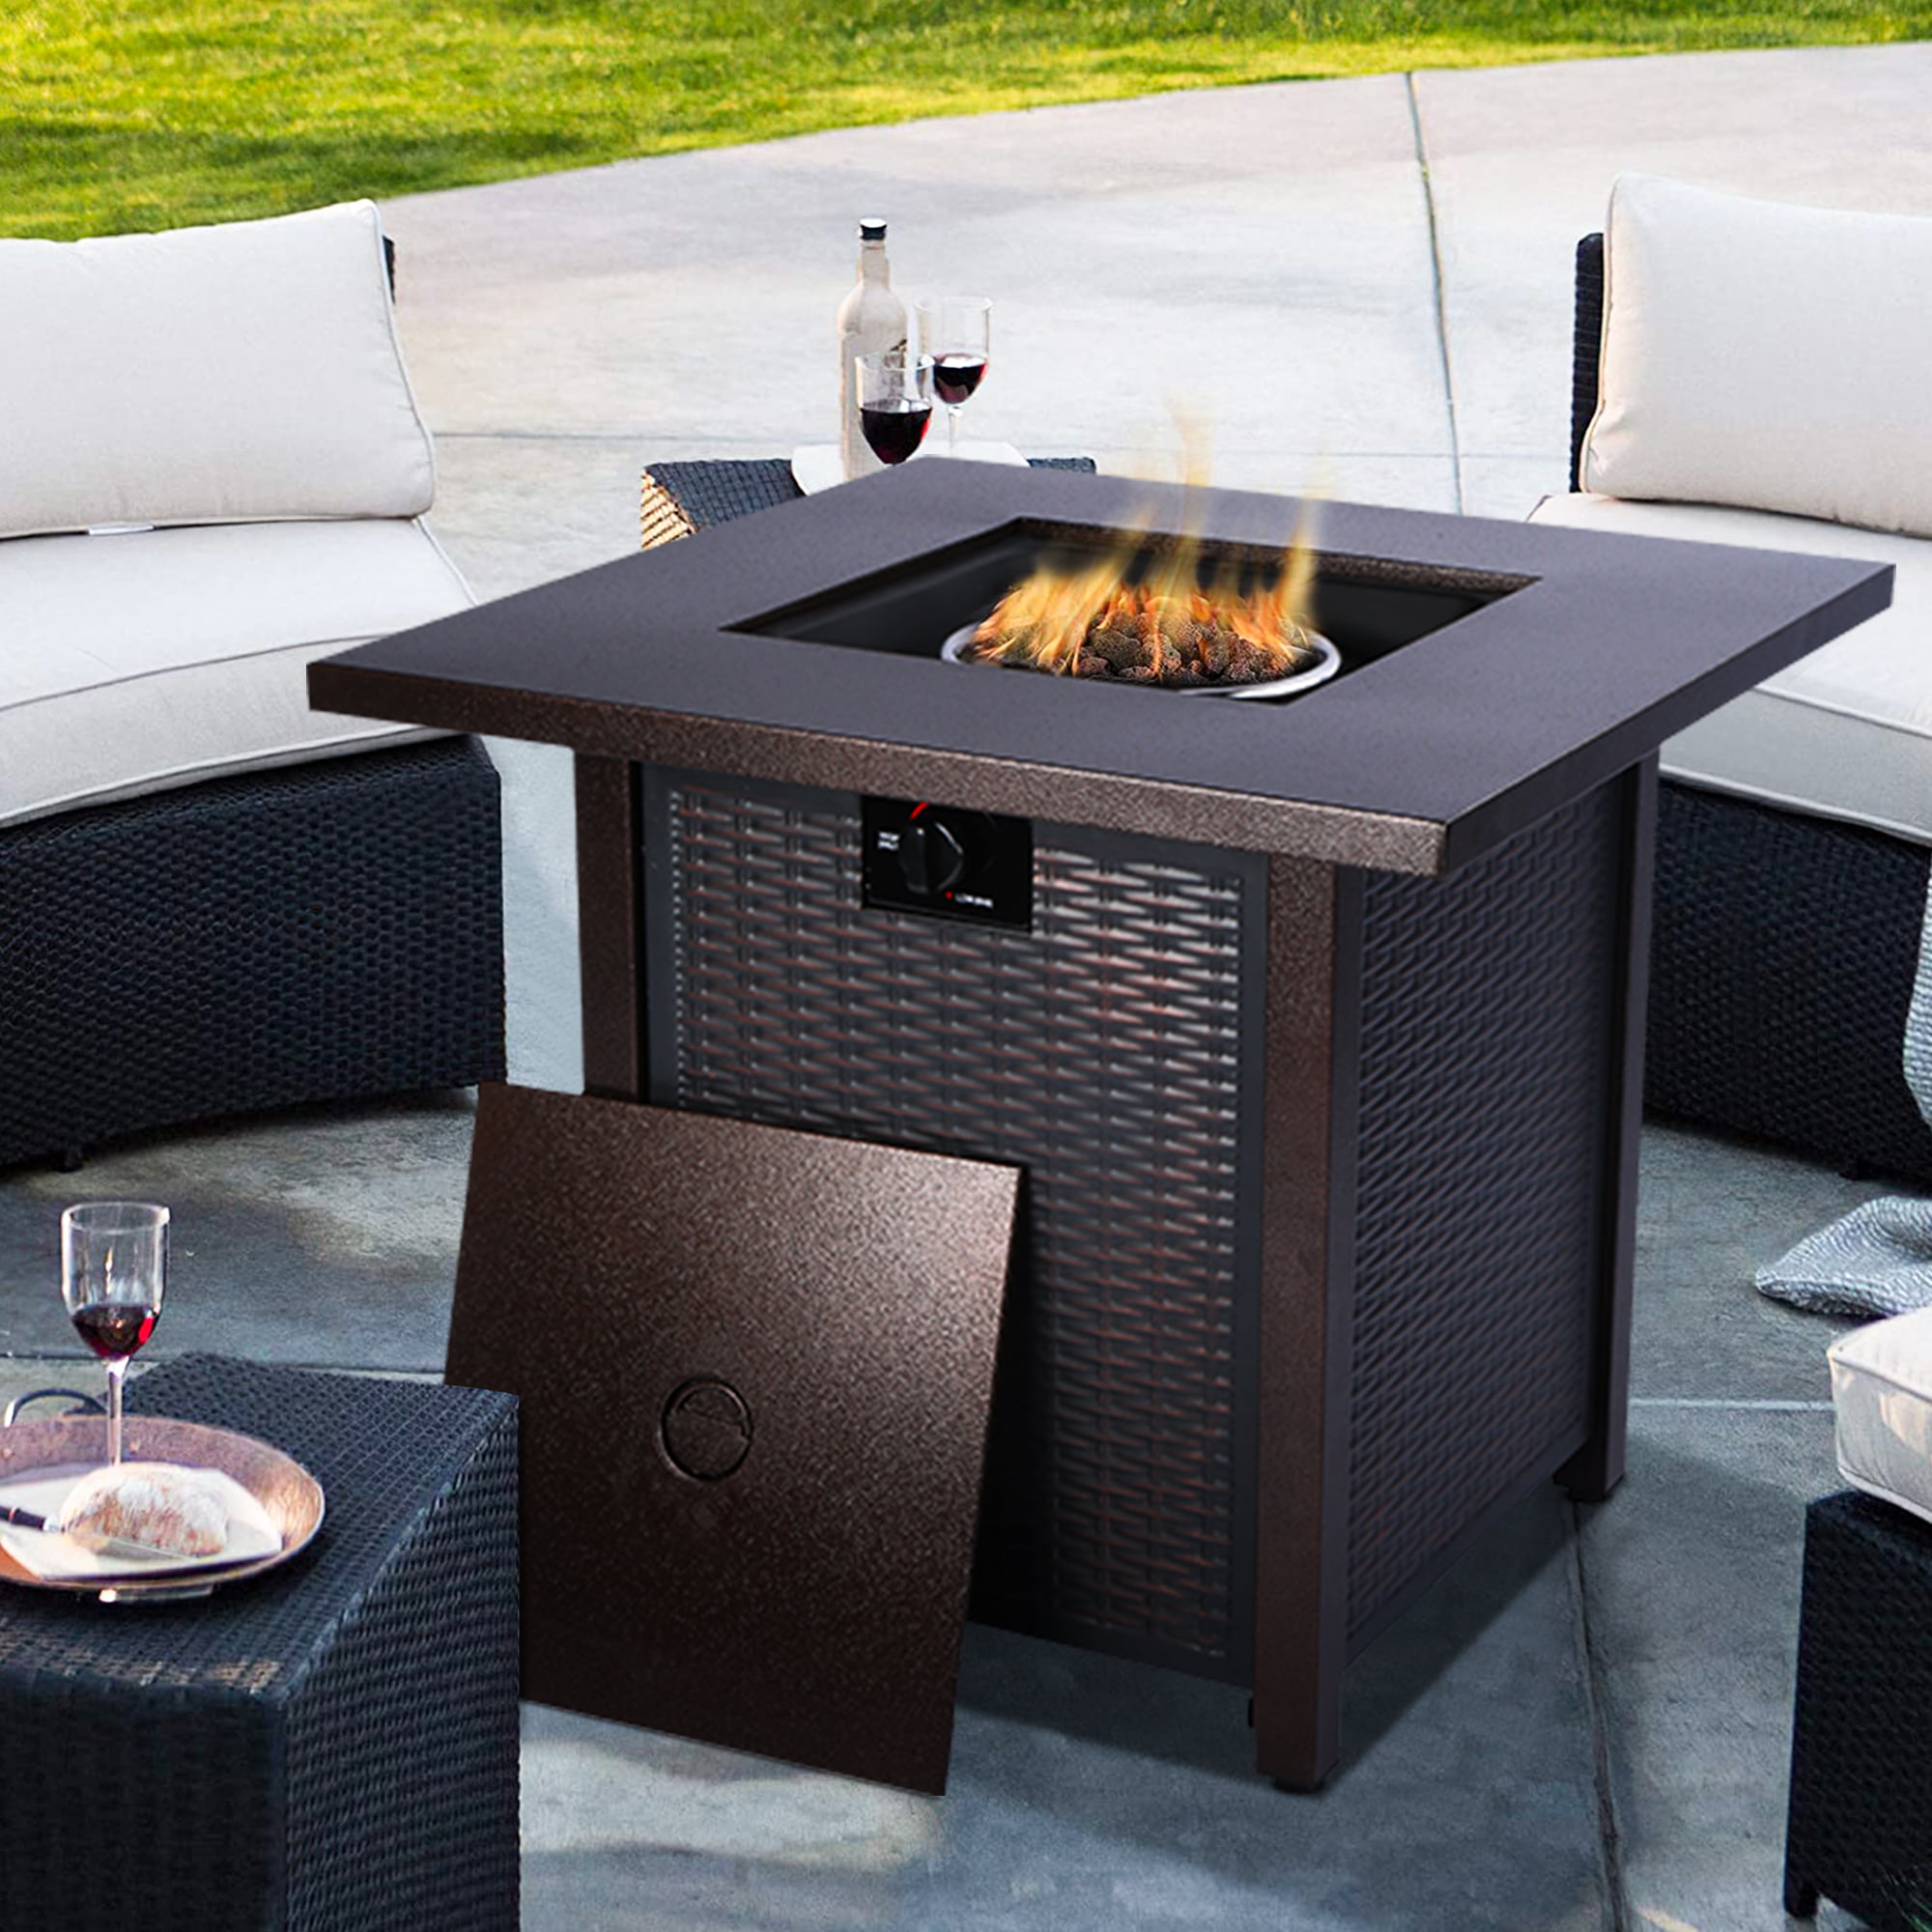 32" Propane Fire Pit Table Patio Heater Outdoor Gas Table Fireplace 50,000 BTU 